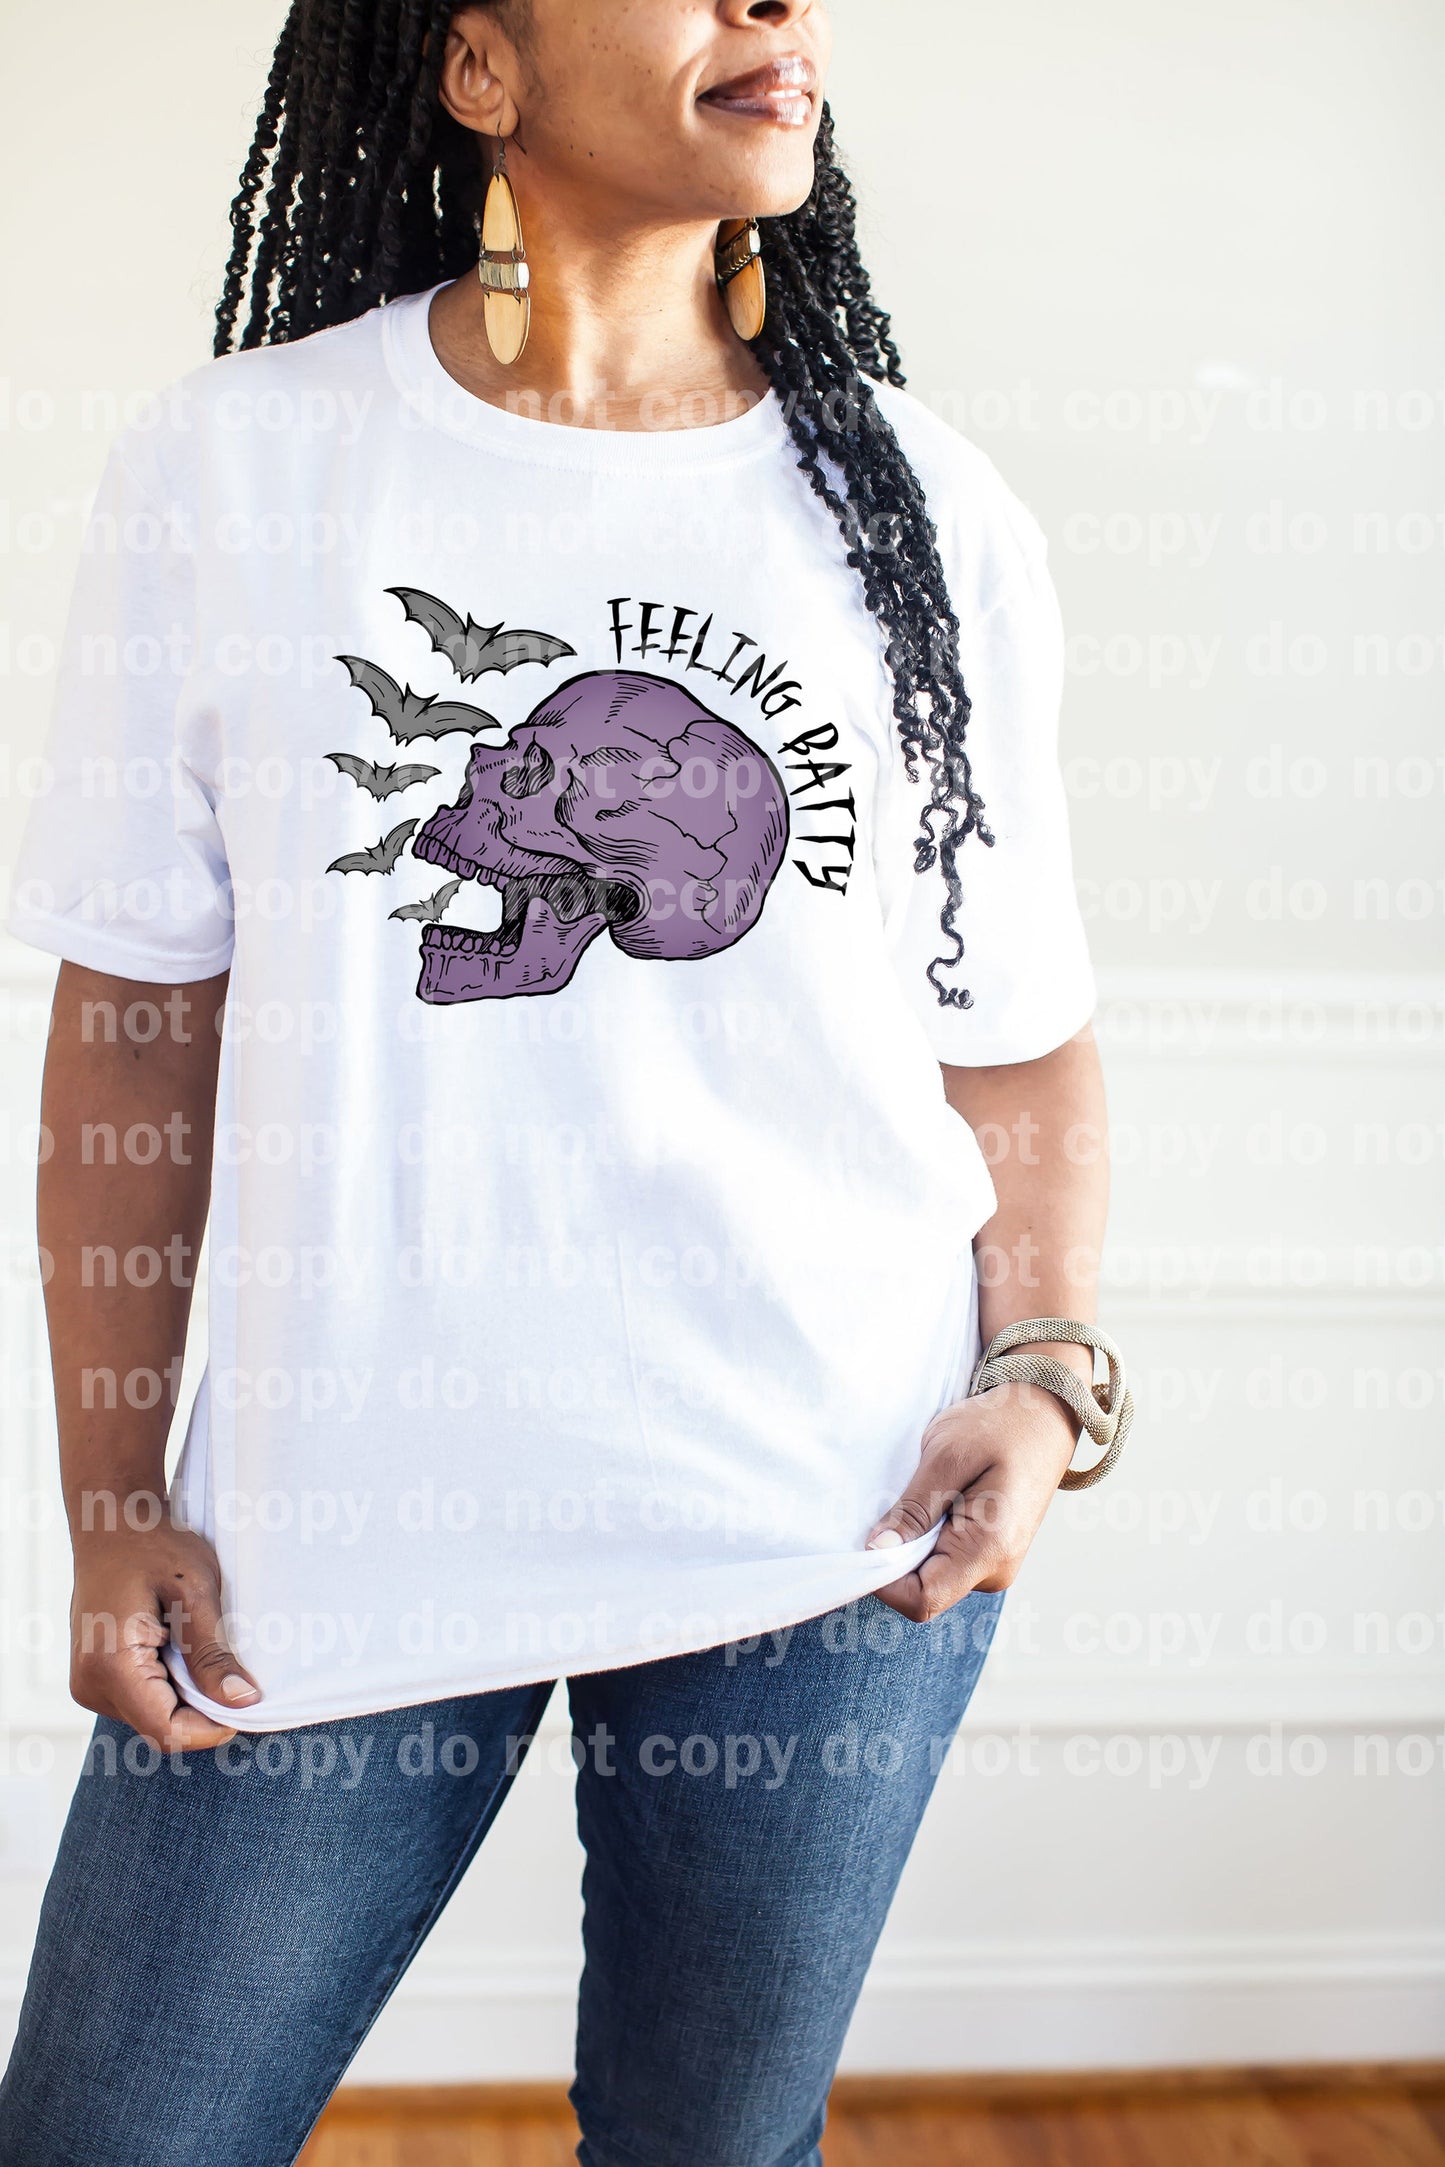 Feeling Batty Skellie Full Color/One Color with Pocket Option Dream Print or Sublimation Print